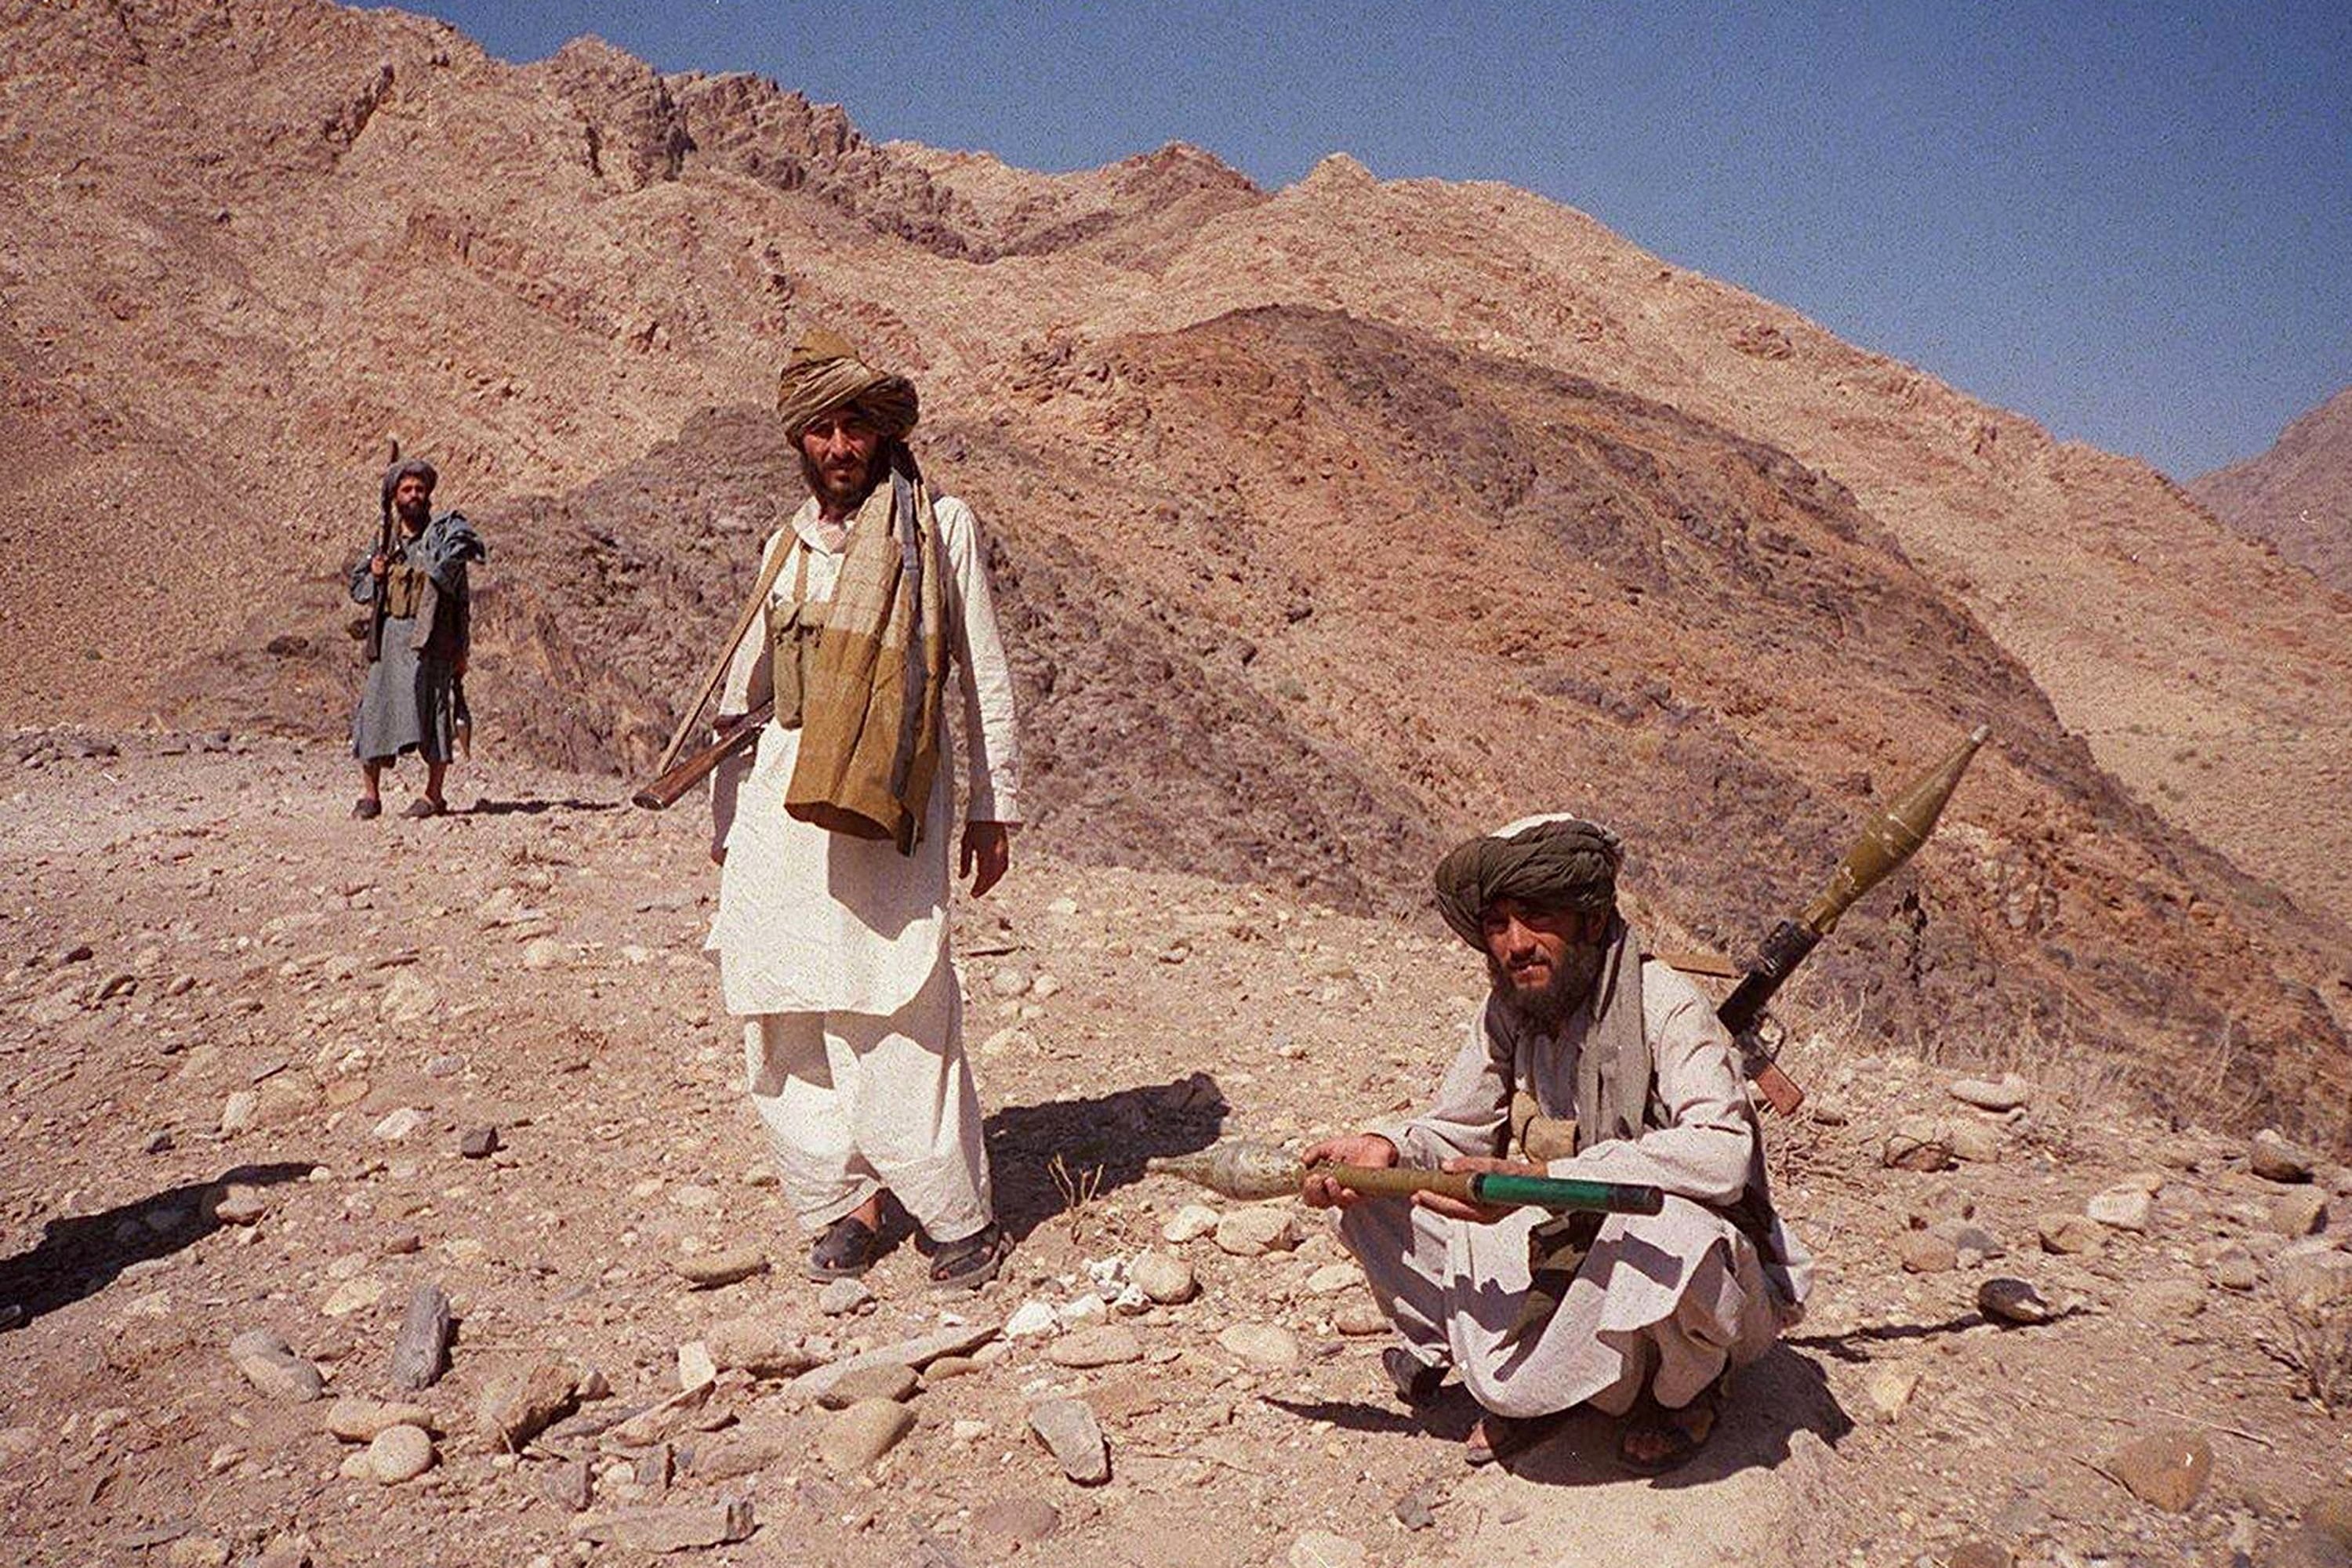 Taliban fighters posing on a hilltop near Jalalabad, Afghanistan on Oct. 14, 2001.